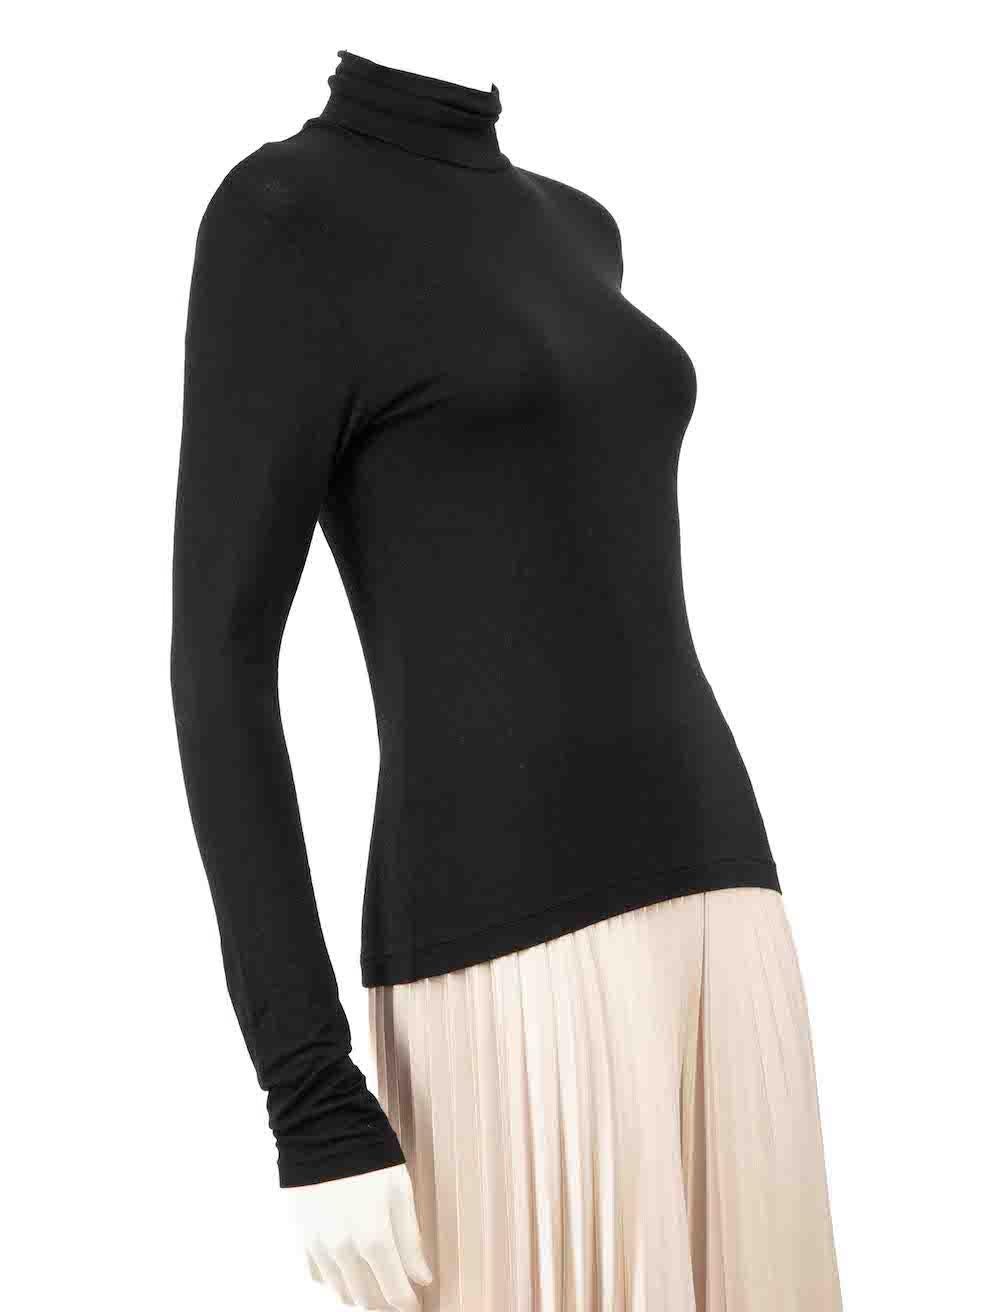 CONDITION is Very good. Hardly any visible wear to turtleneck is evident on this used Yohji Yamamoto designer resale item.
 
 
 
 Details
 
 
 Black
 
 Rayon
 
 Top
 
 Long sleeves
 
 Mock neck
 
 Back zip fastening
 
 Stretchy
 
 
 
 
 
 Made in